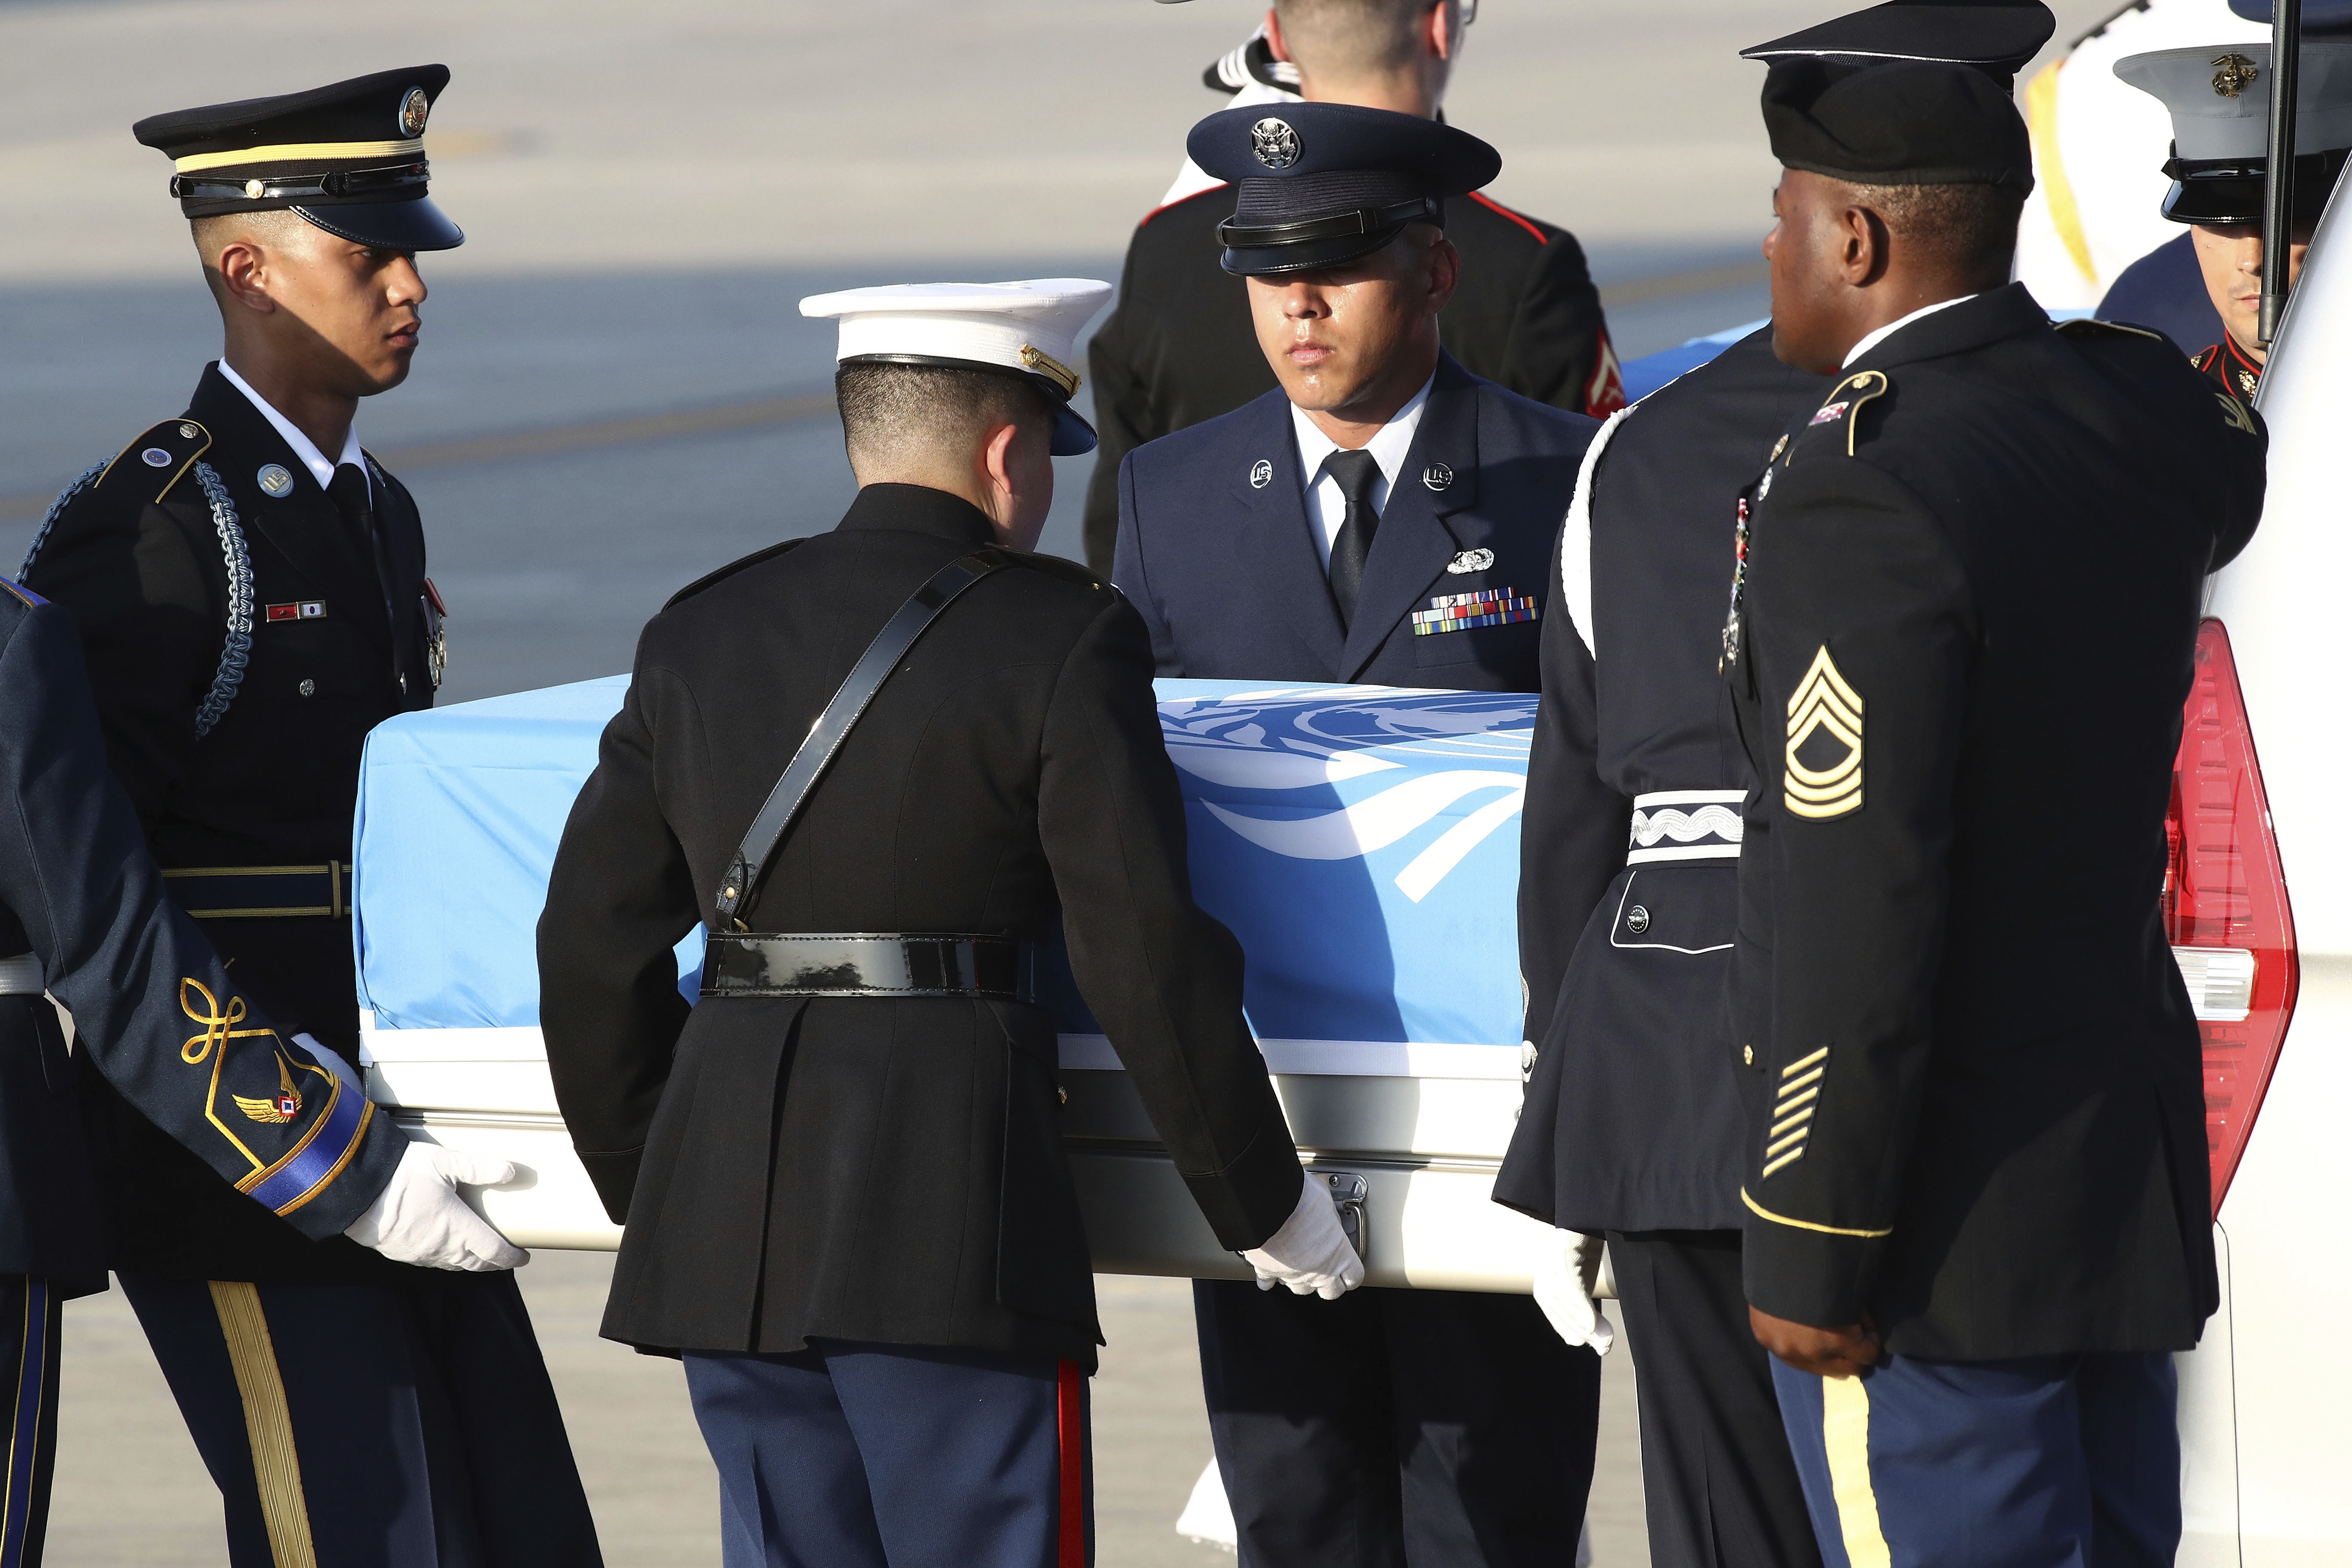 Honour guards carry the remains of US servicemen killed in the Korean War